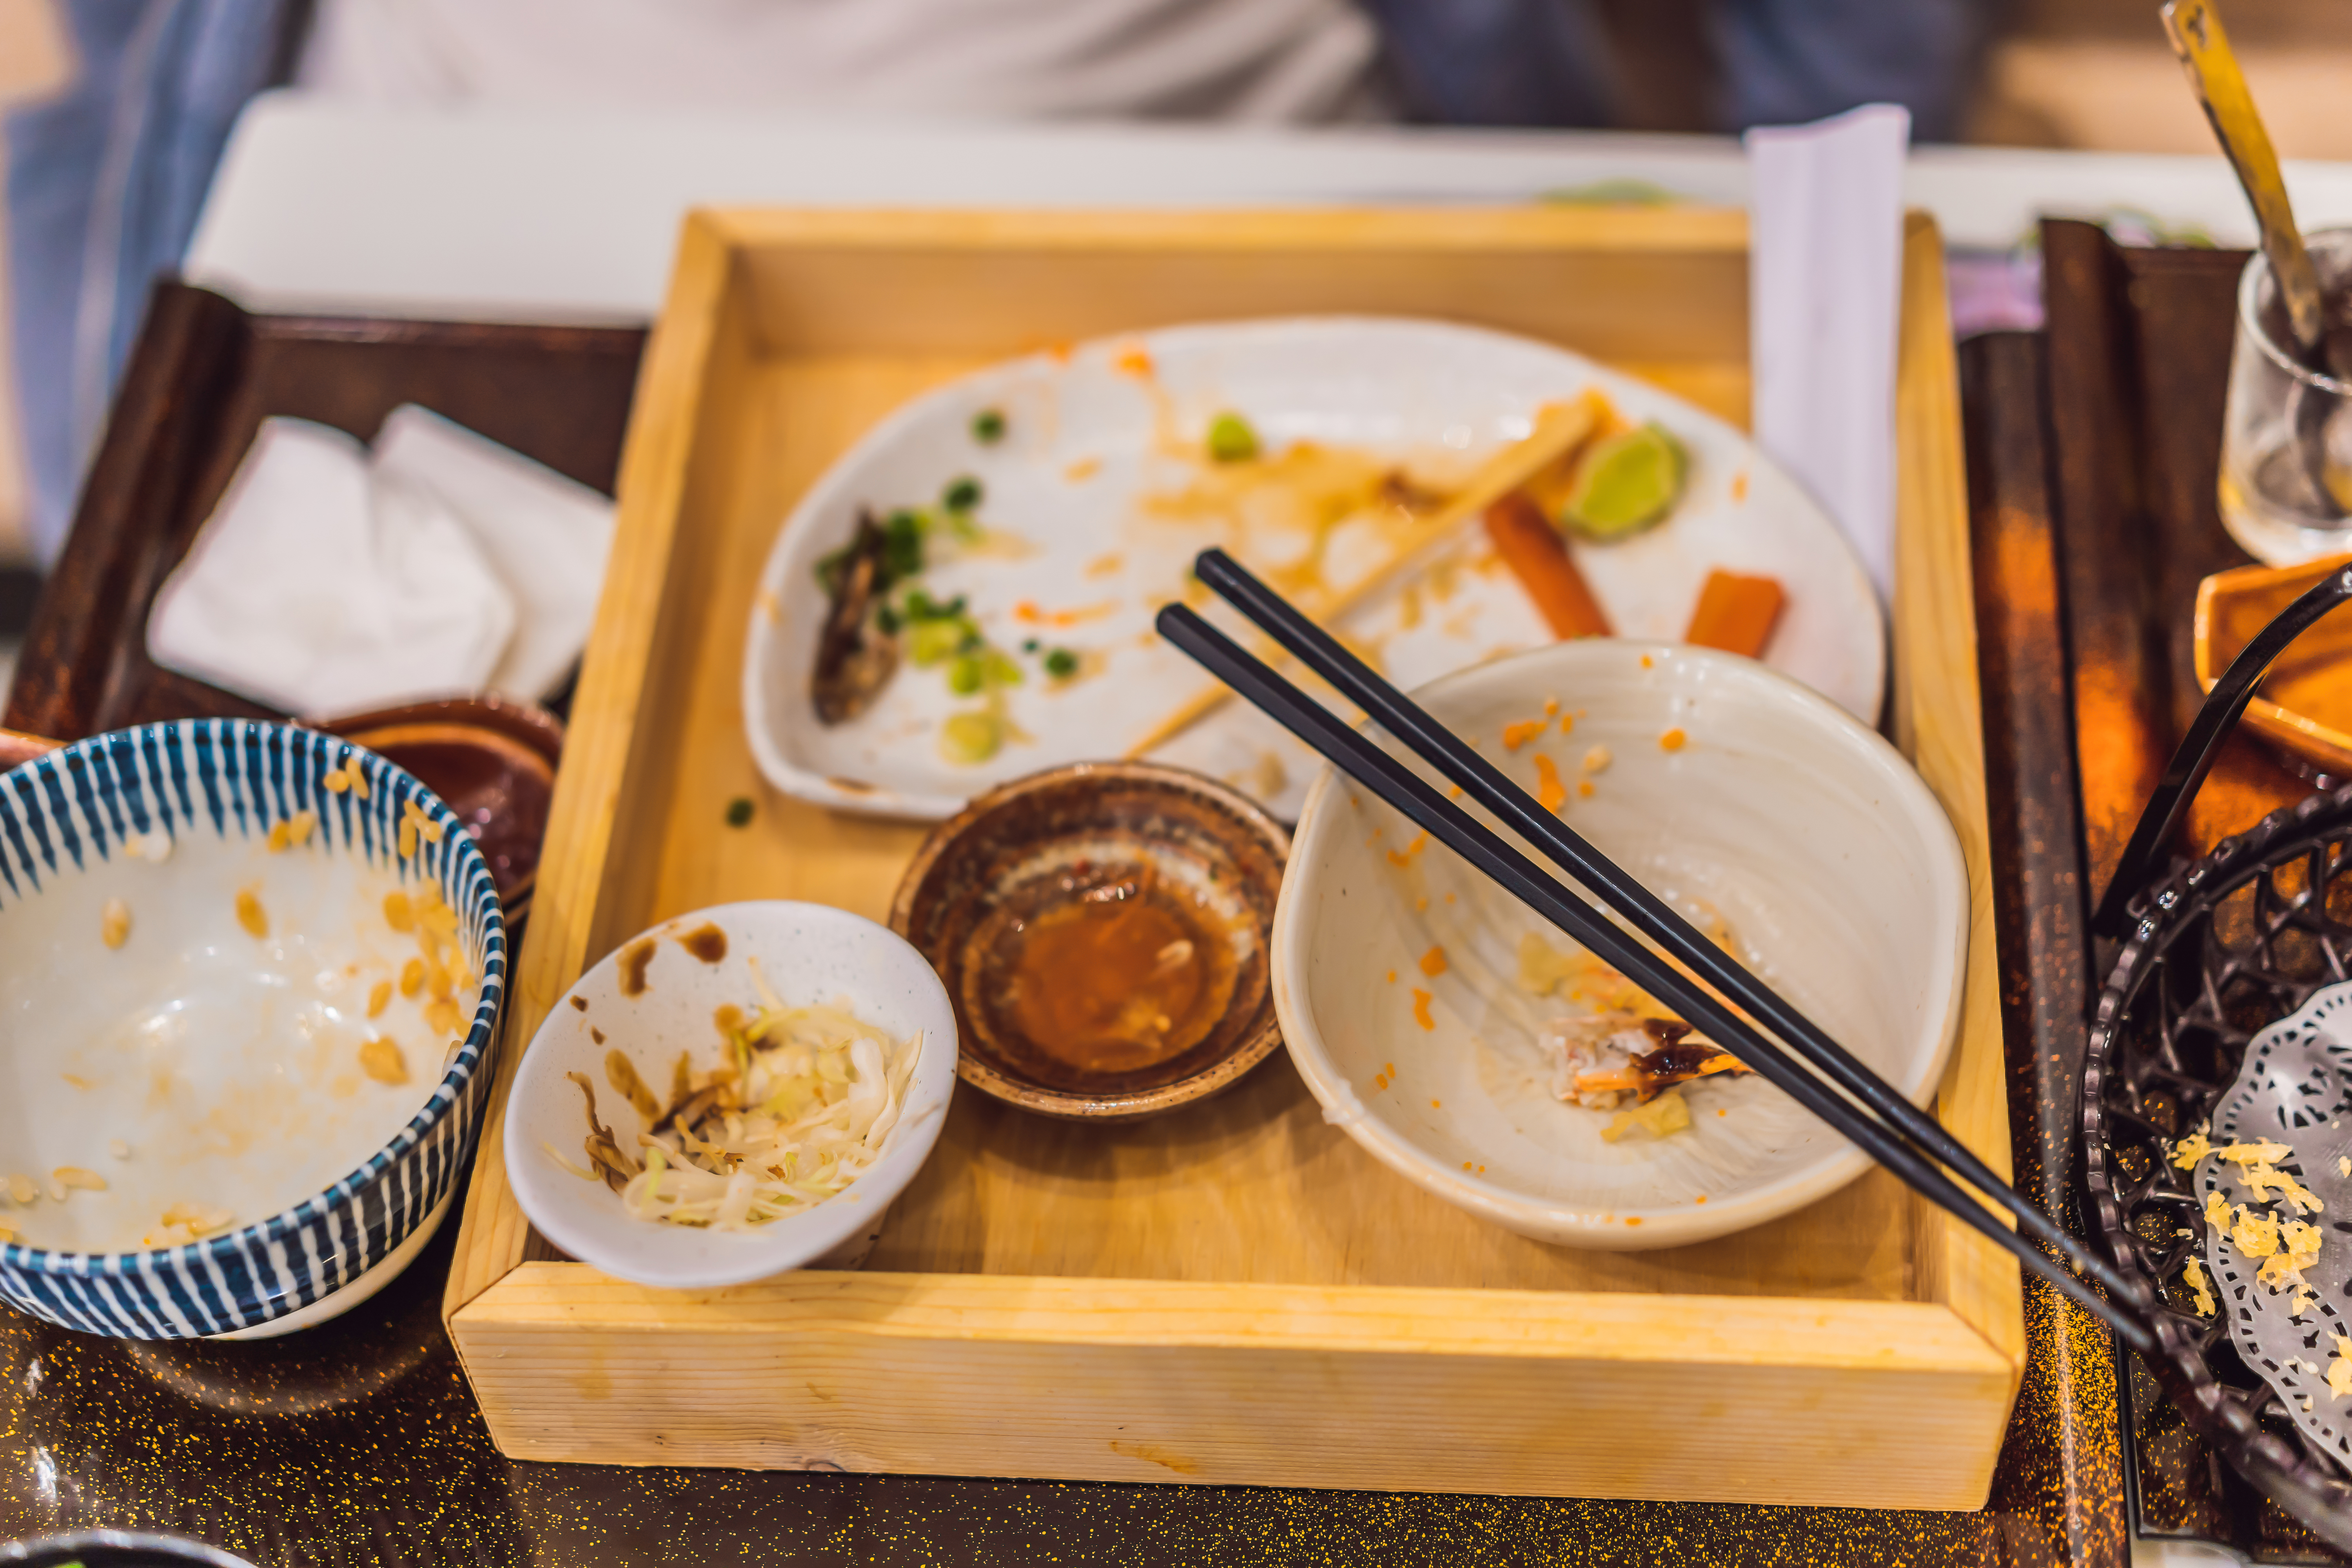 Unwashed dishes and chopsticks | Source: Shutterstock